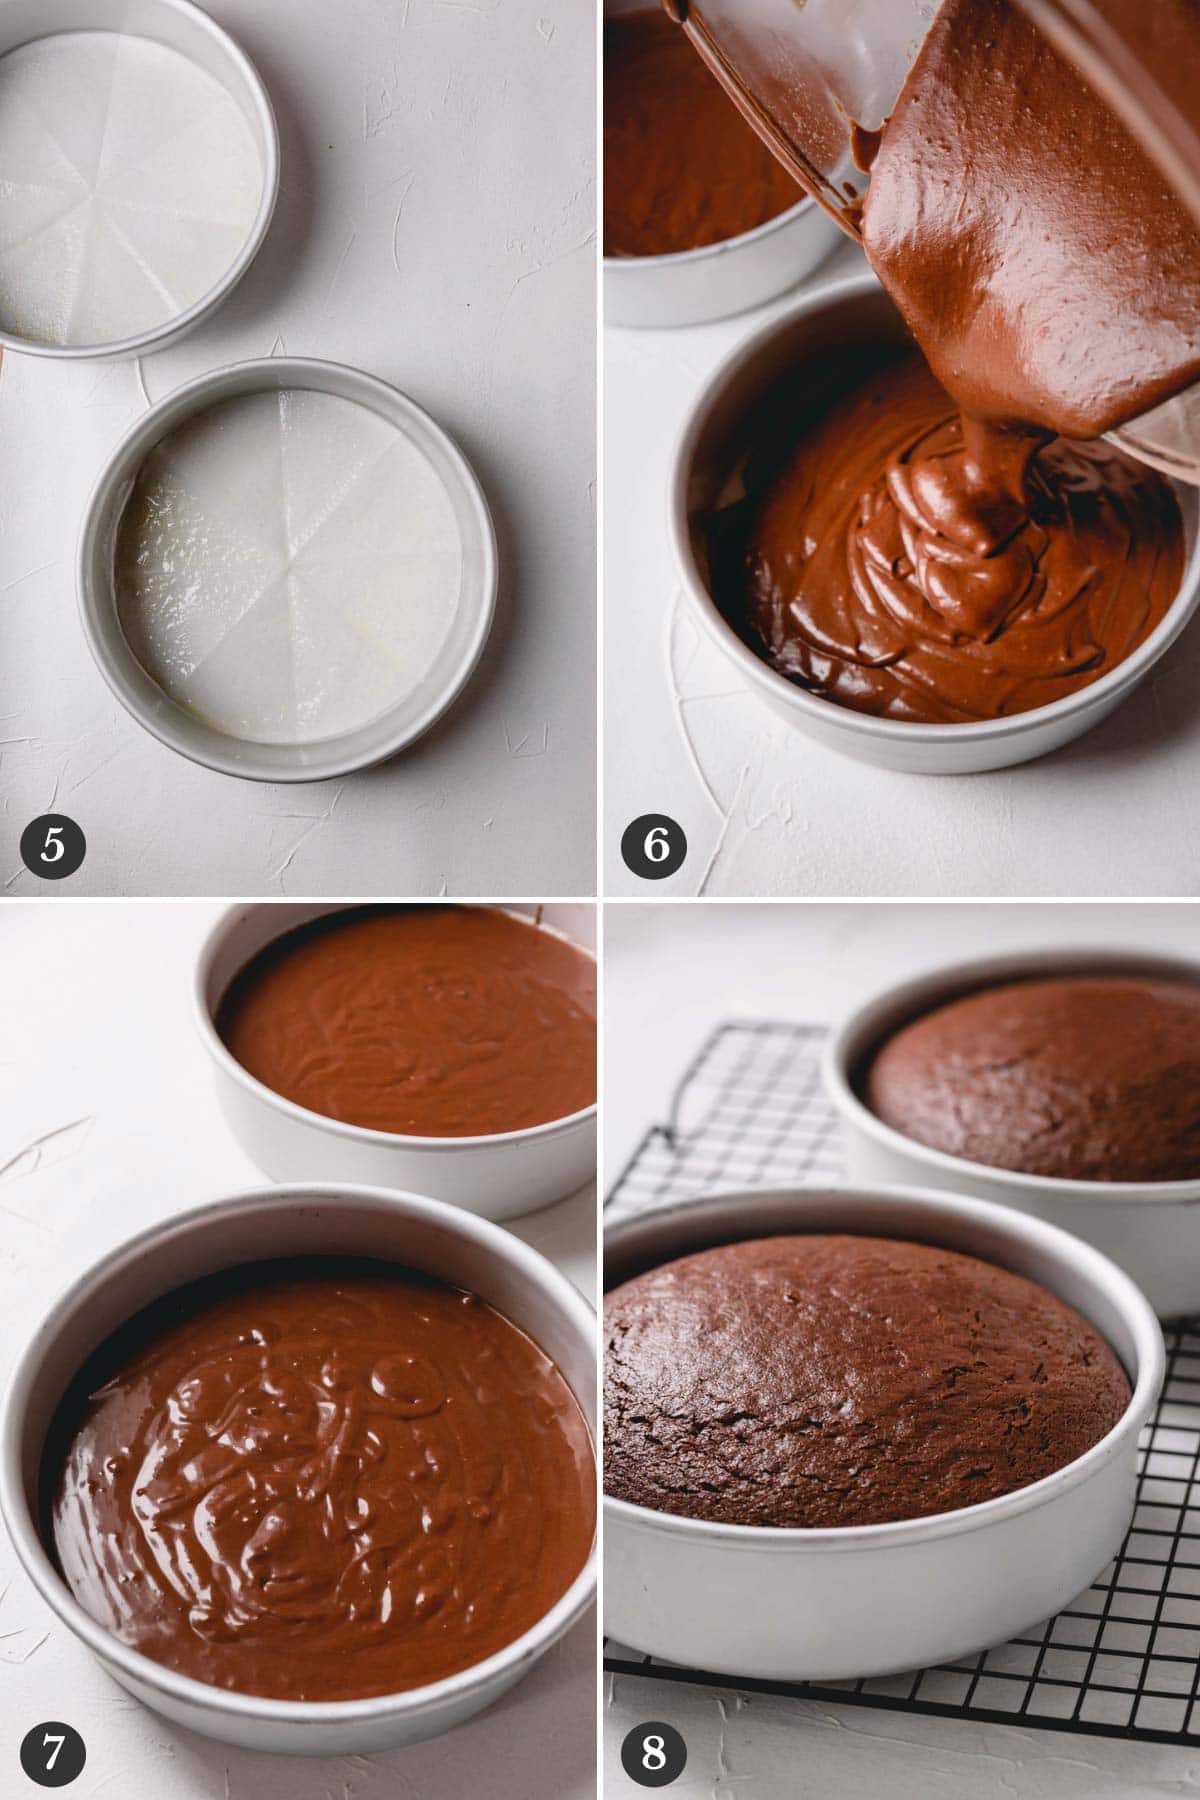 Step by step photos of baking chocolate cake layers.